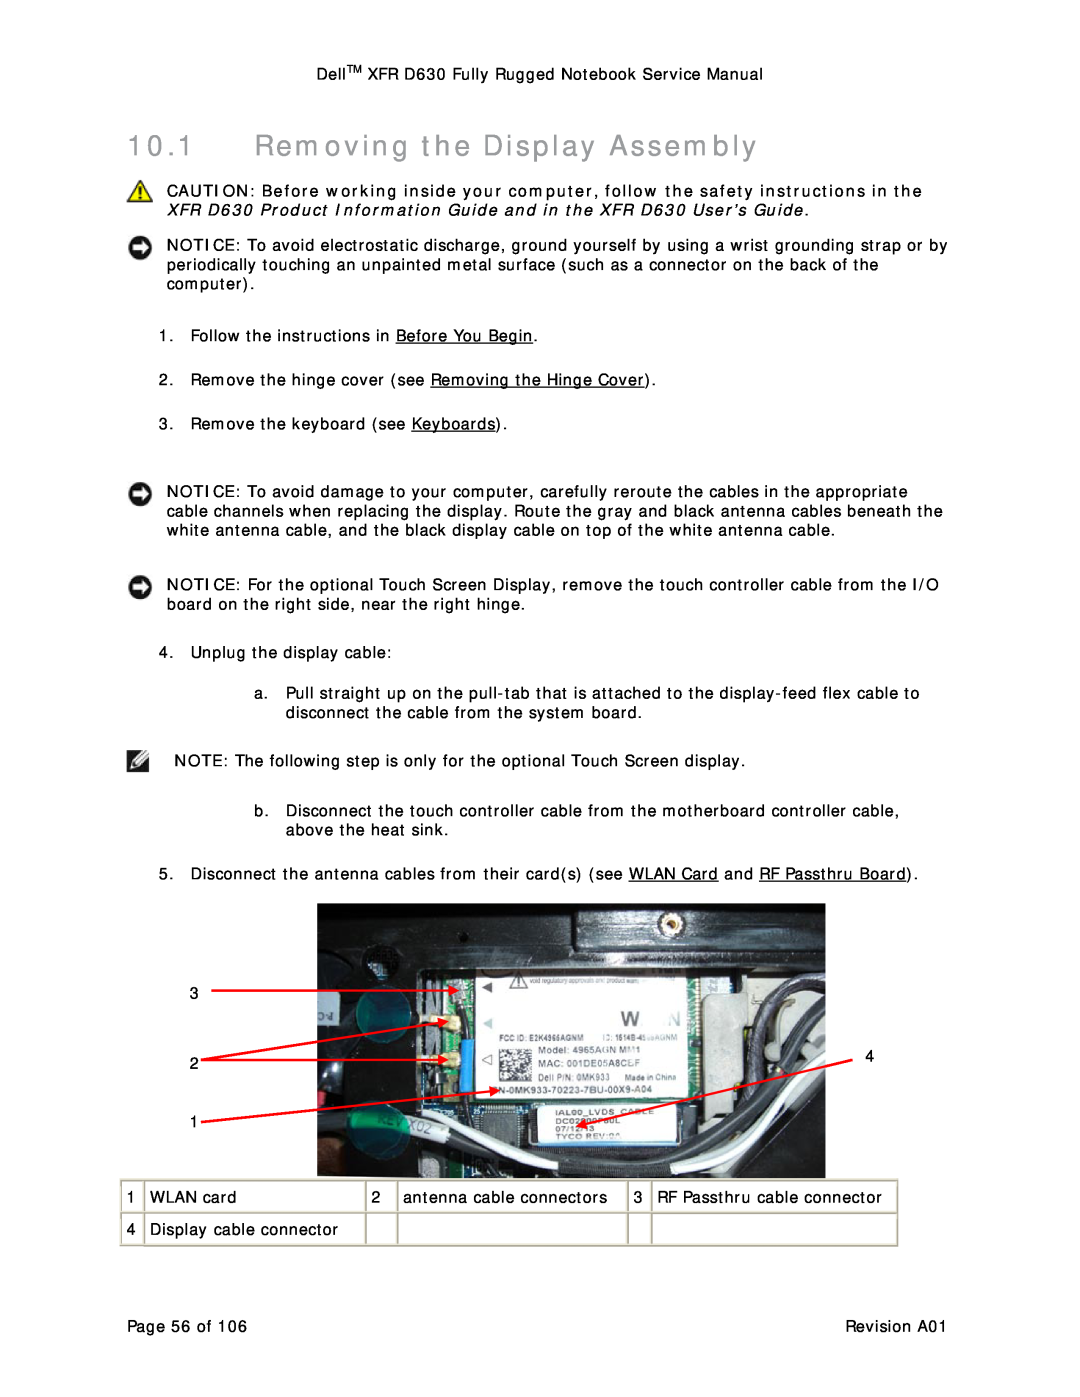 Dell D630 service manual Removing the Display Assembly 